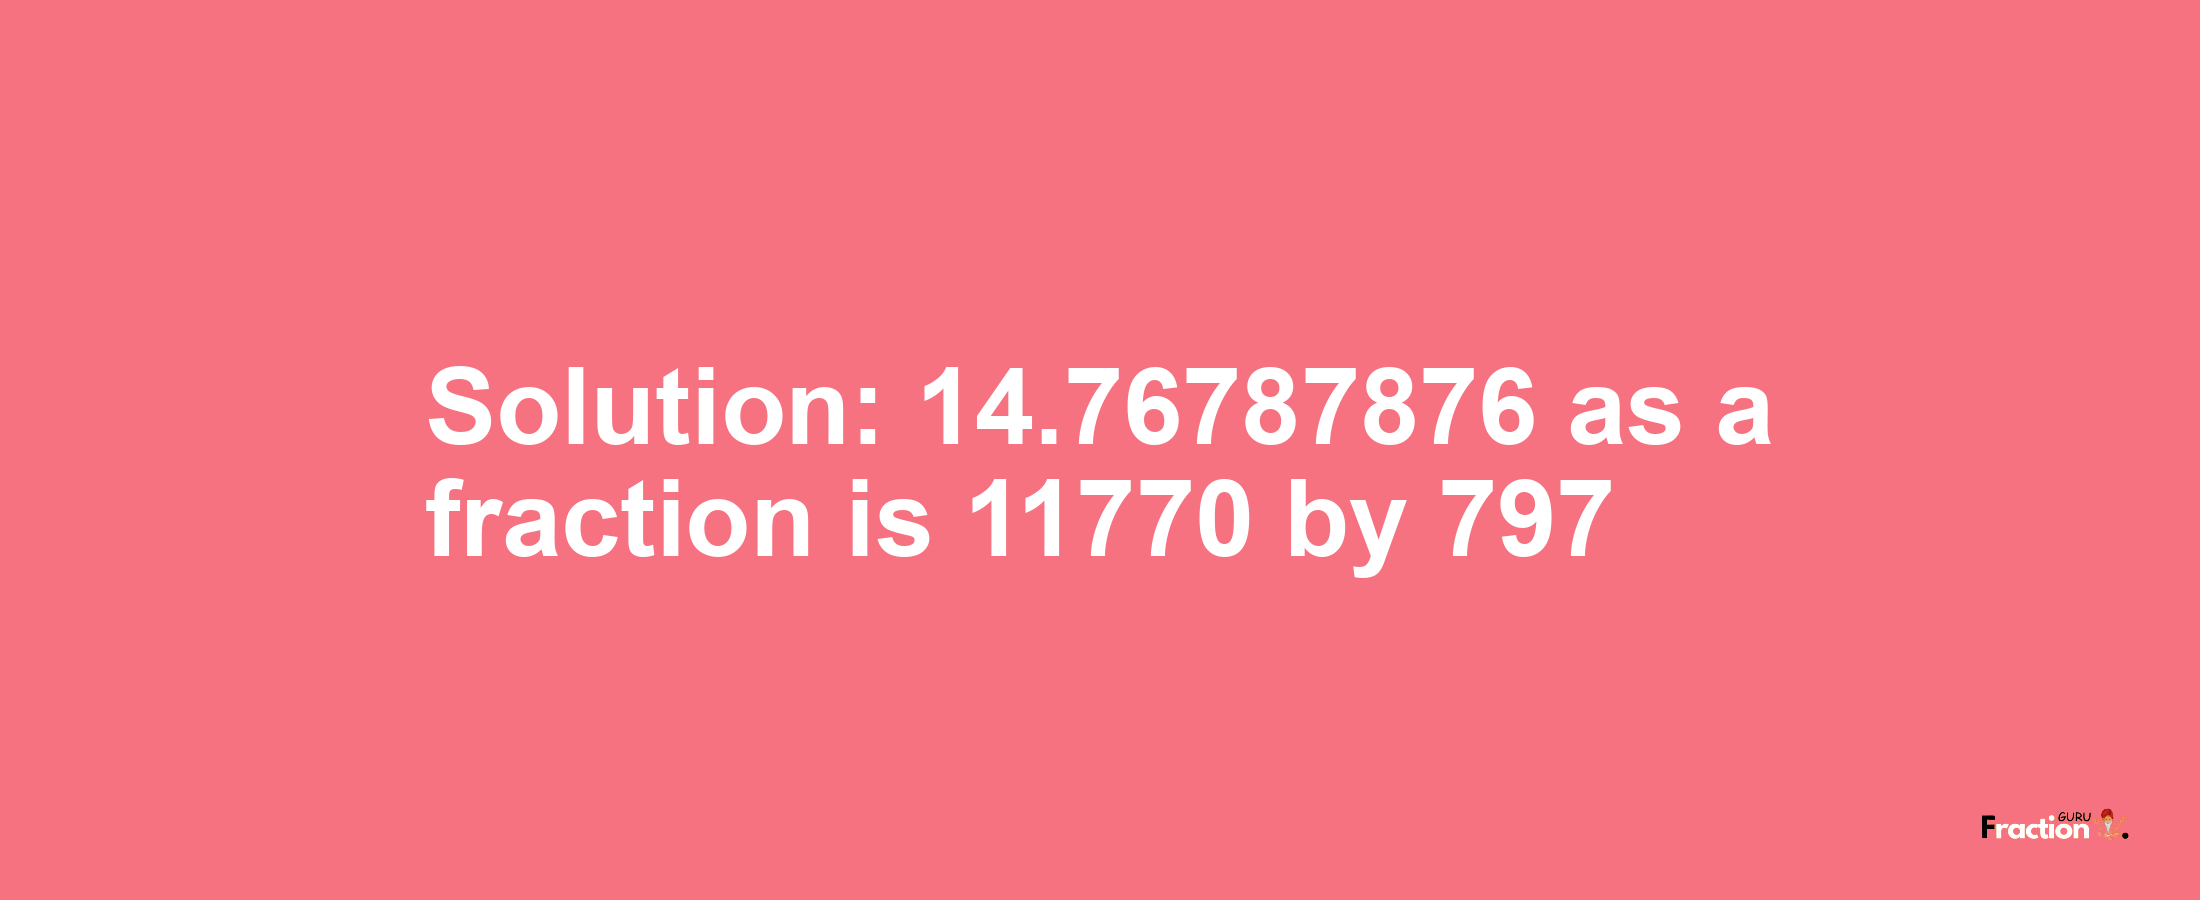 Solution:14.76787876 as a fraction is 11770/797